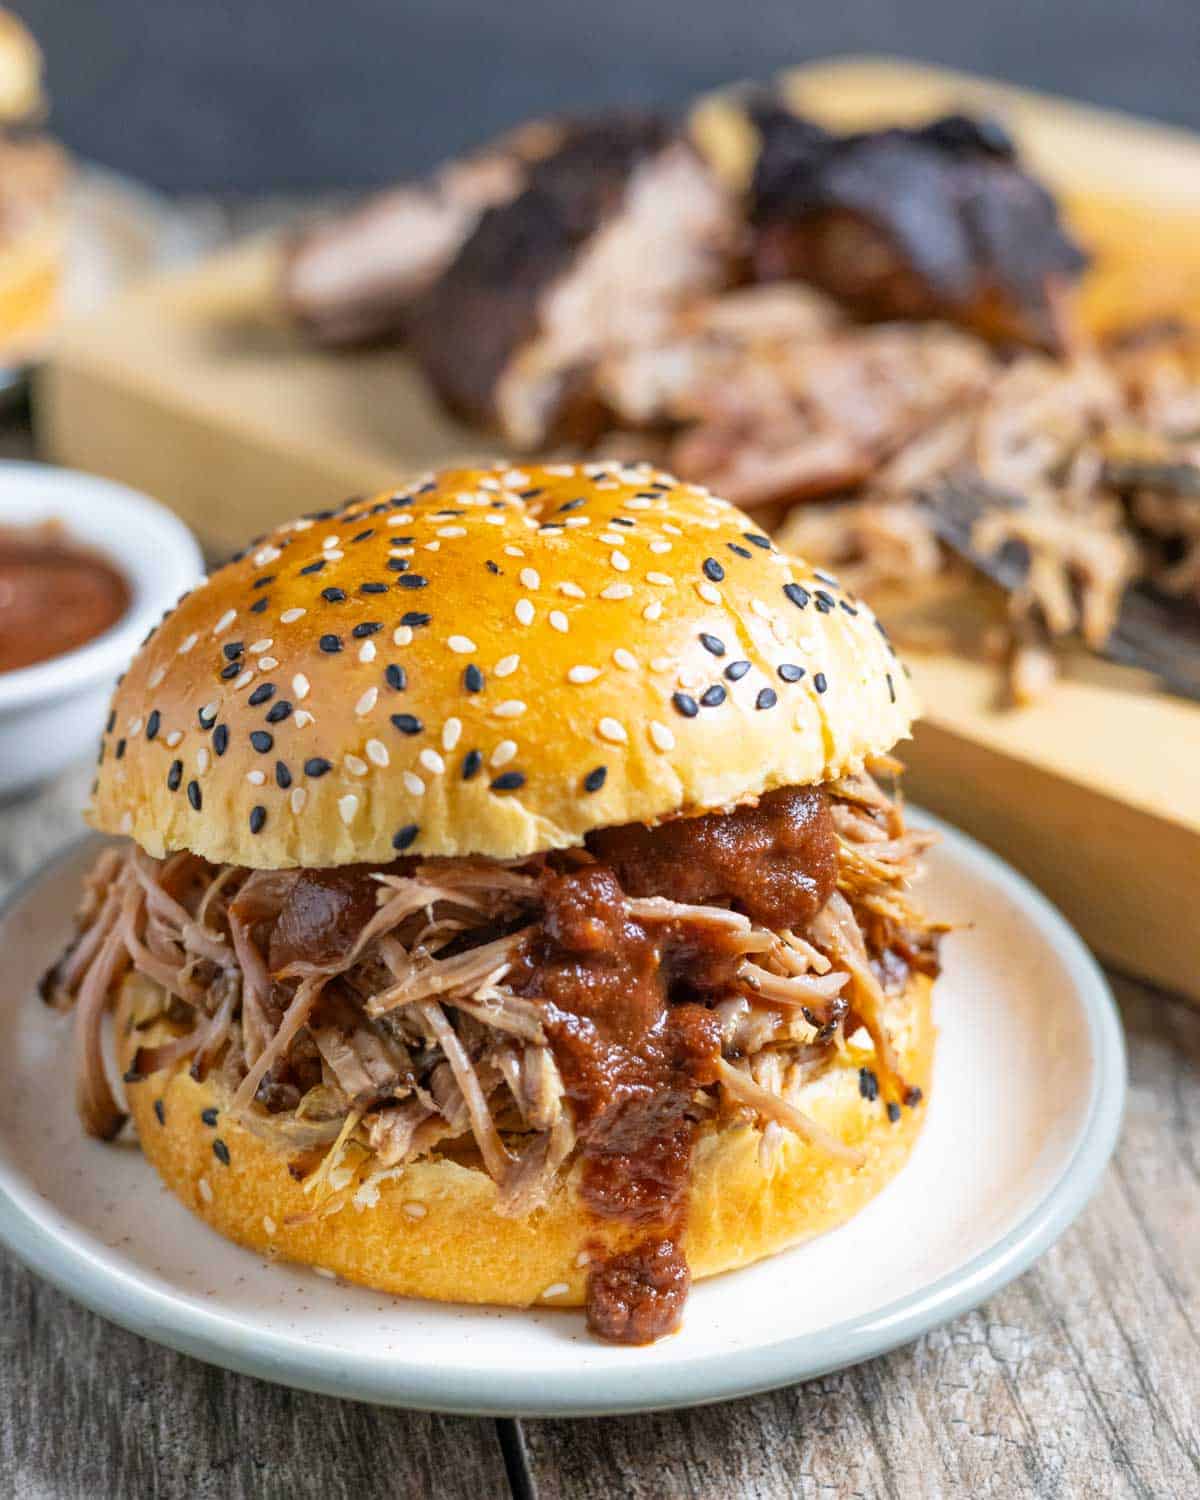 Pulled pork on a sesame seed bun with homemade no-cook bbq sauce dripping over the pork and bottom bun.